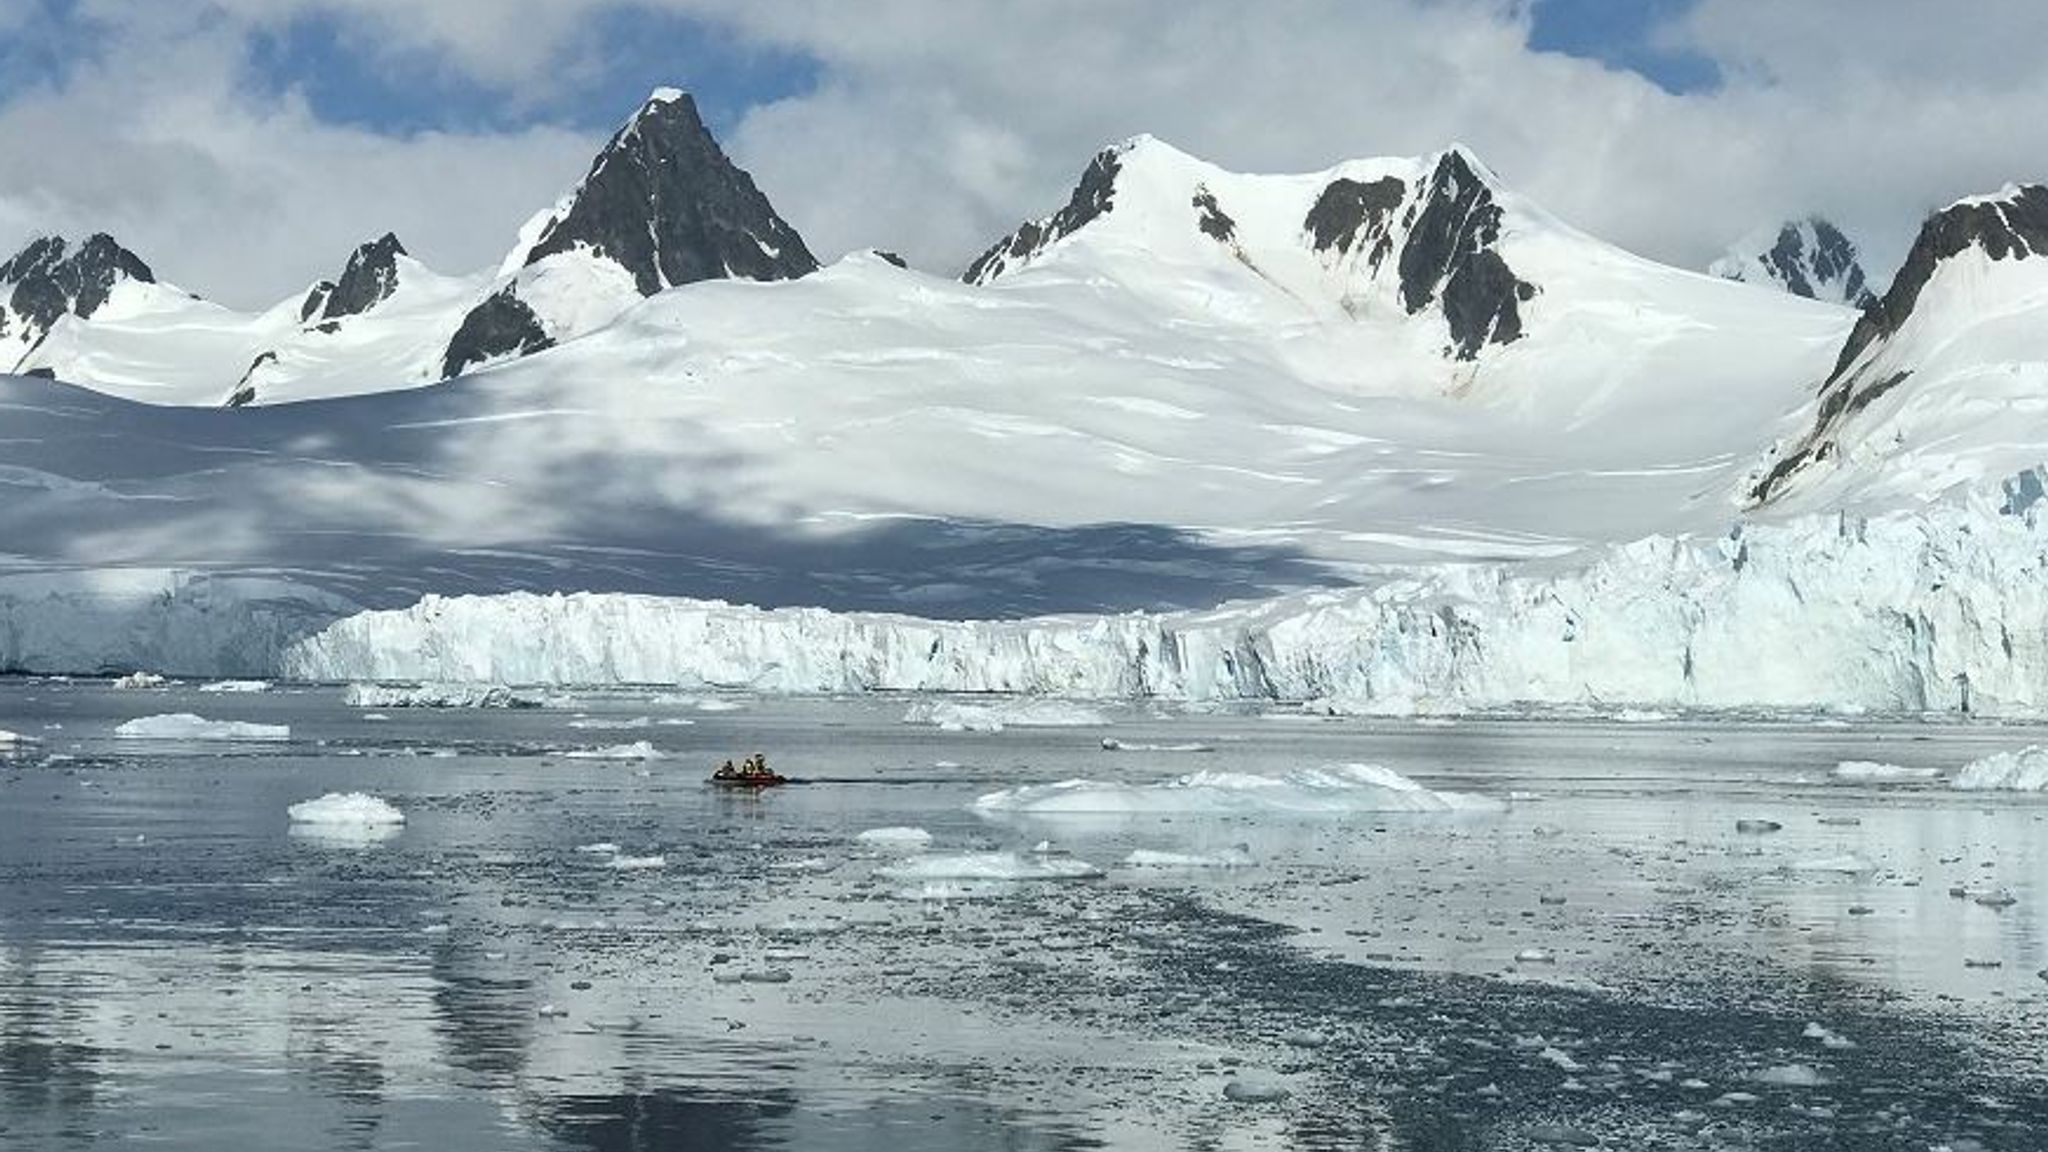 Daily updates as Sky heads into Antarctic wilderness